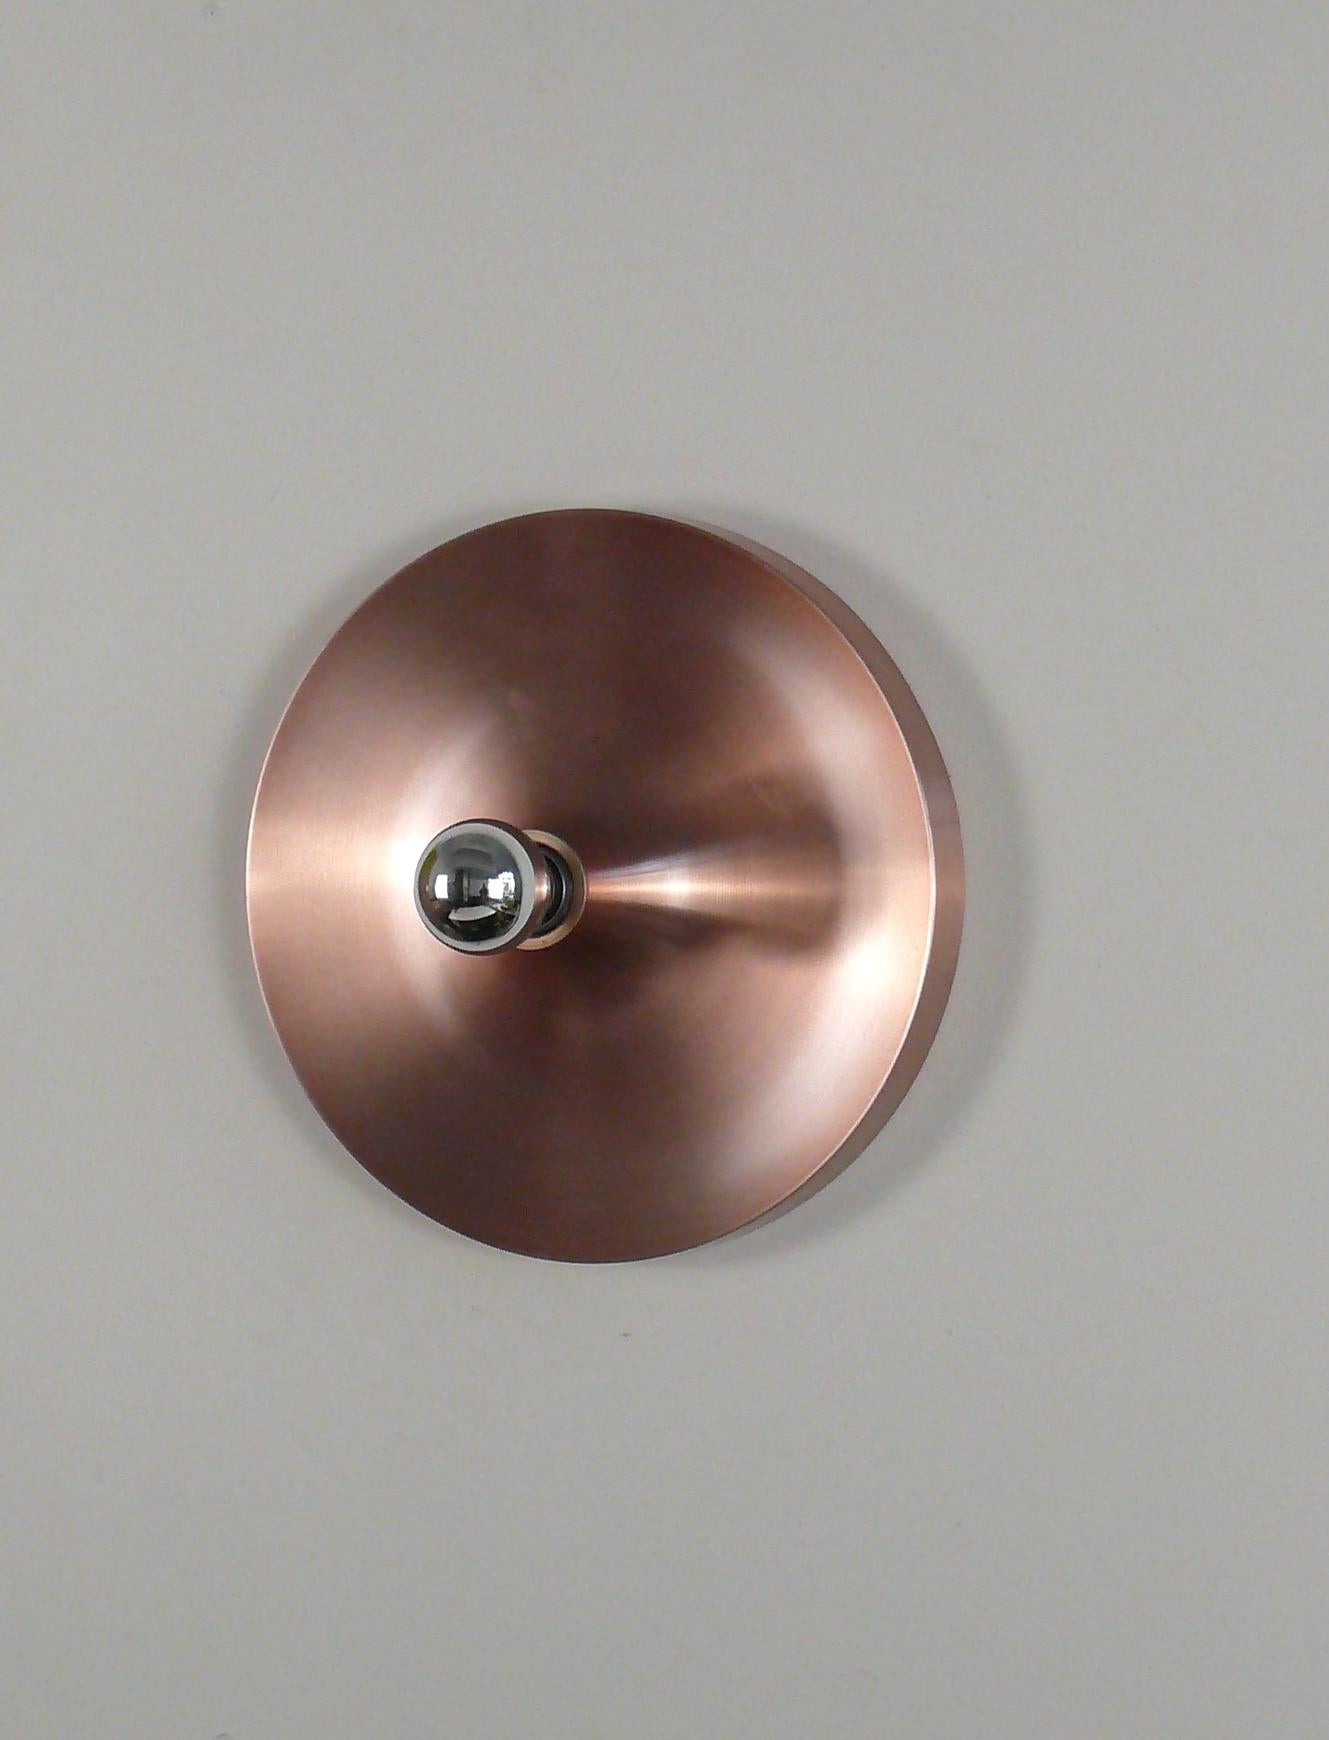 Original discus lamp from the 1960s by Teka (similiar to Honsel), Germany. The lamp is made of brushed aluminum in an old pink coloring, roughly copper-colored, se pictures. It can be attached to both the ceiling and the wall. The lamp has an E 27